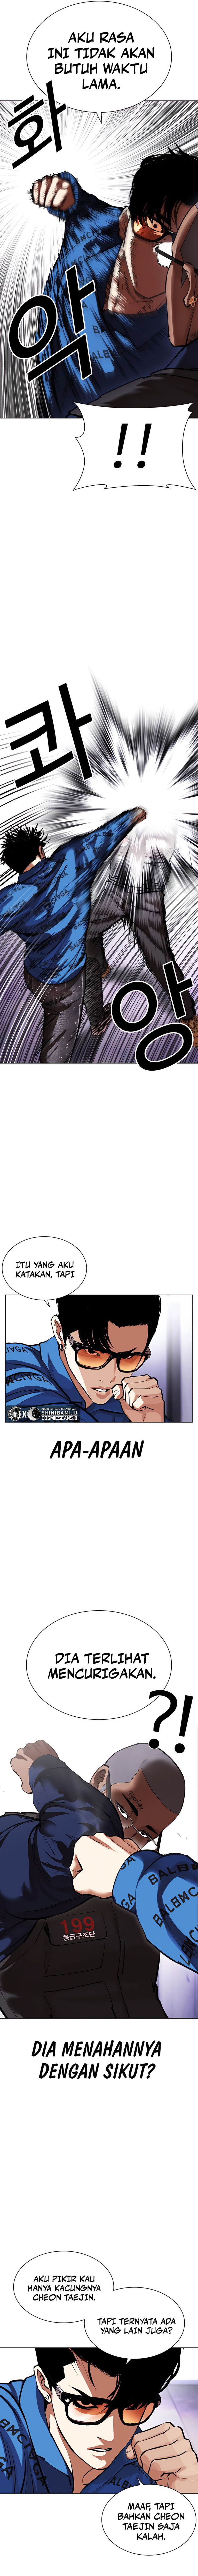 Lookism Chapter 463 Image 15